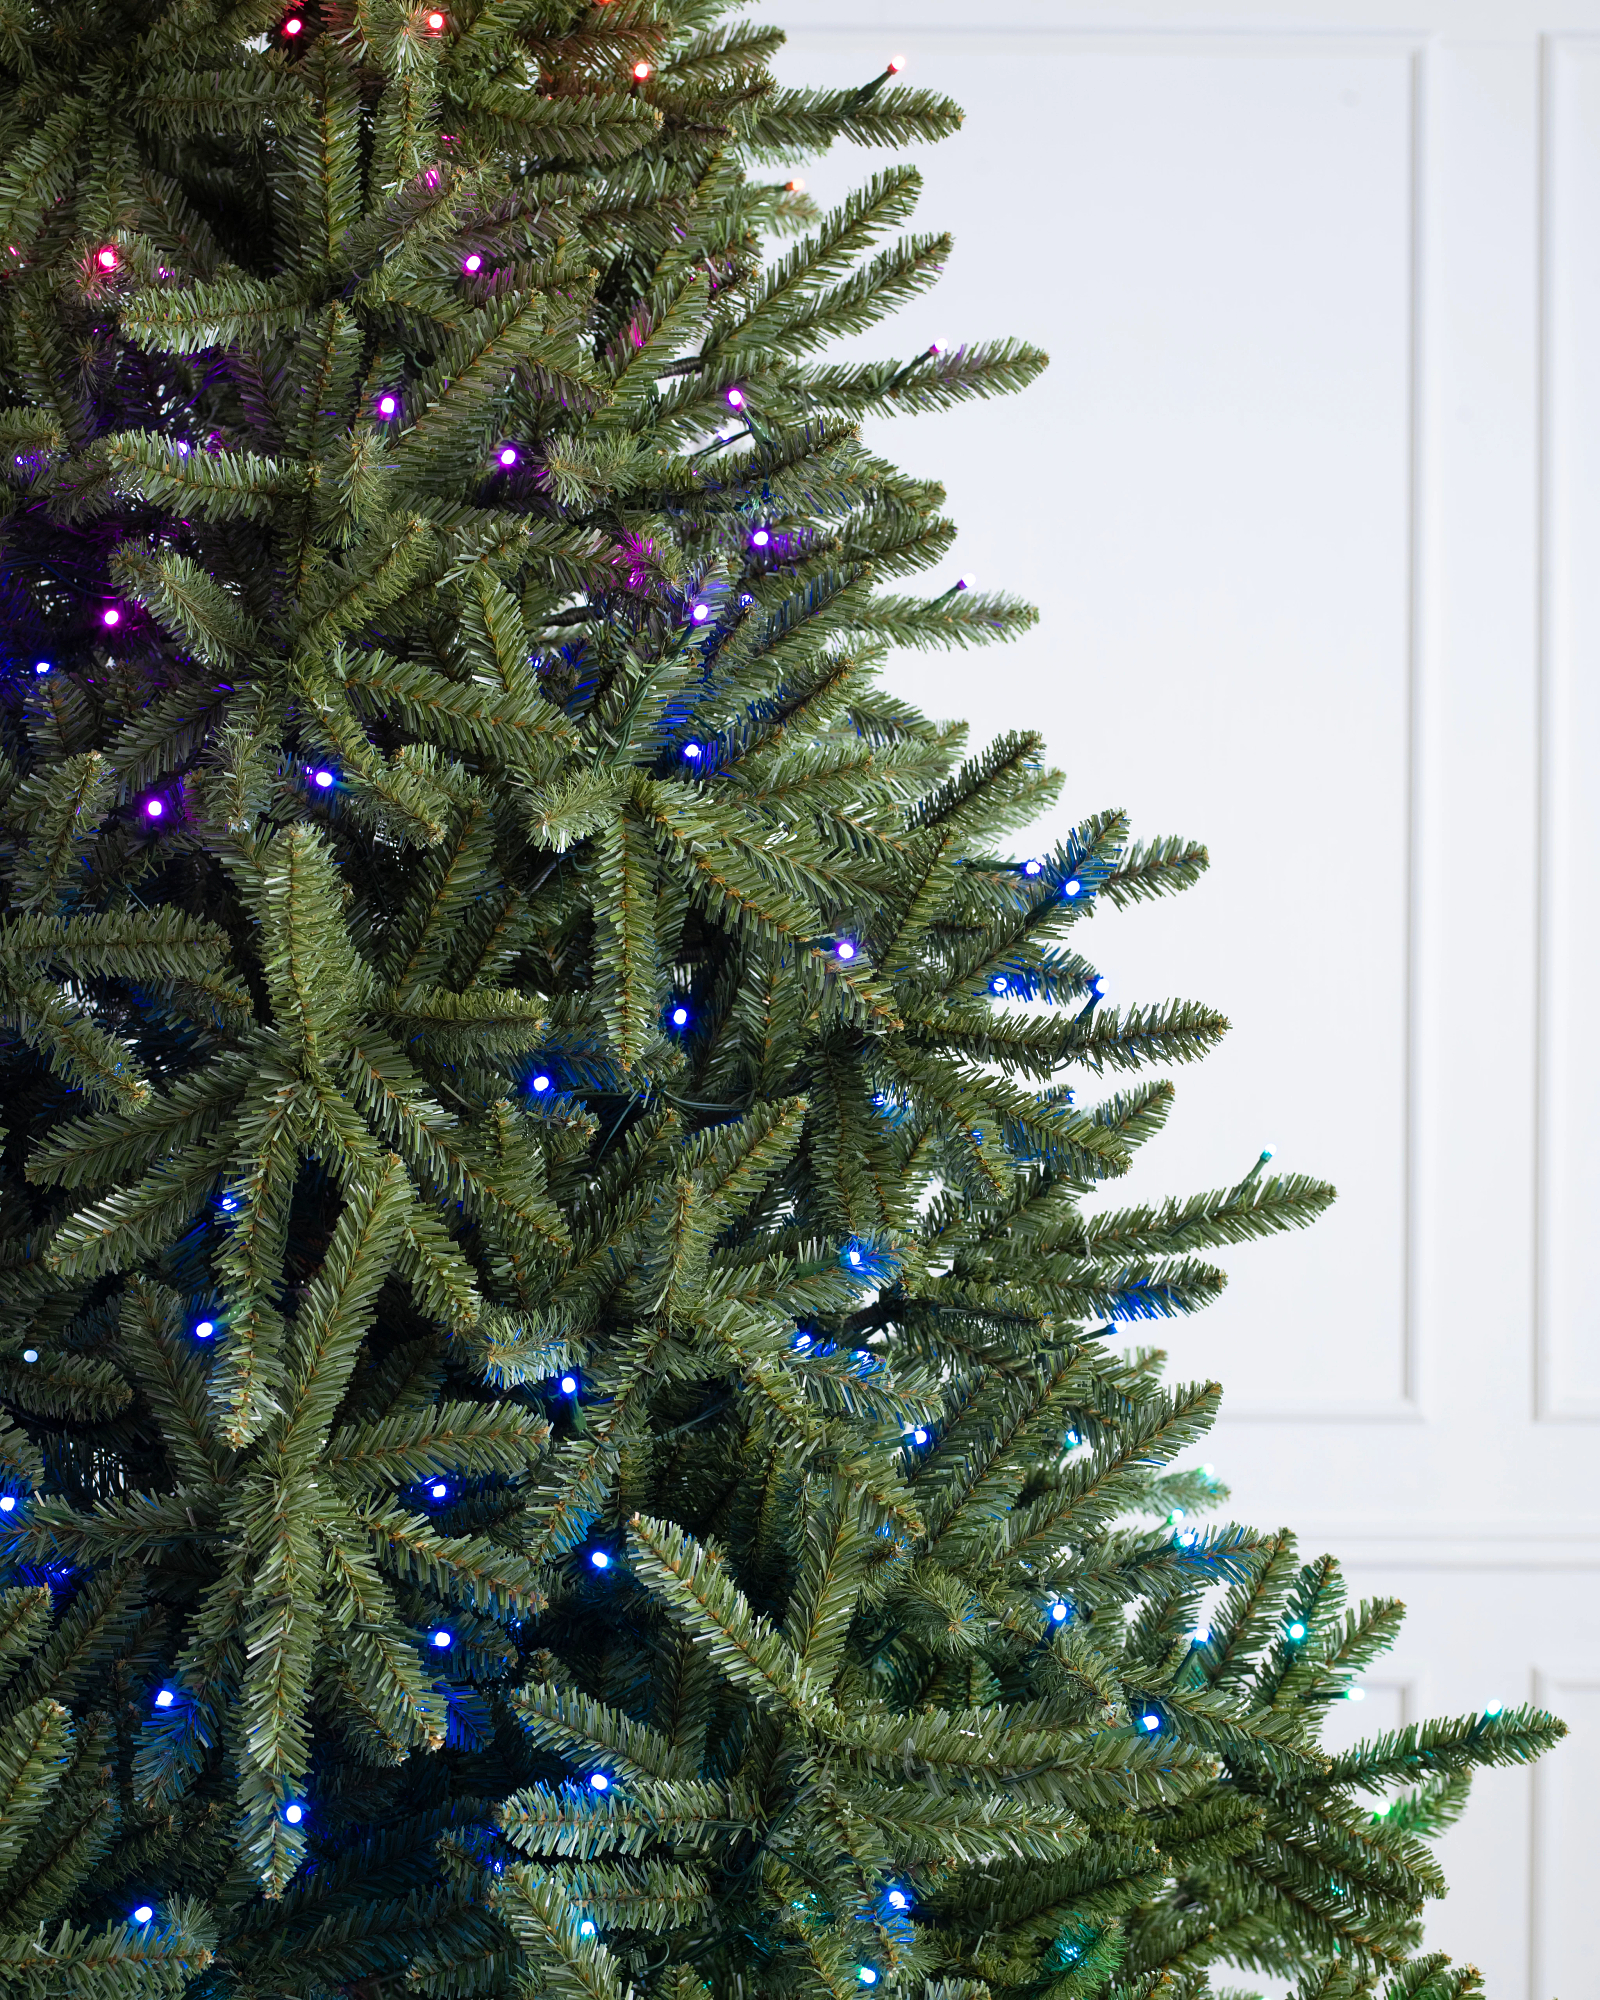 https://source.widen.net/content/1eyt8vf6e1/jpeg/Classic-Blue-Spruce-Artificial-Christmas-Tree_Twinkly_Closeup-10.jpeg?w=1600&h=2000&keep=c&crop=yes&color=cccccc&quality=100&u=7mzq6p